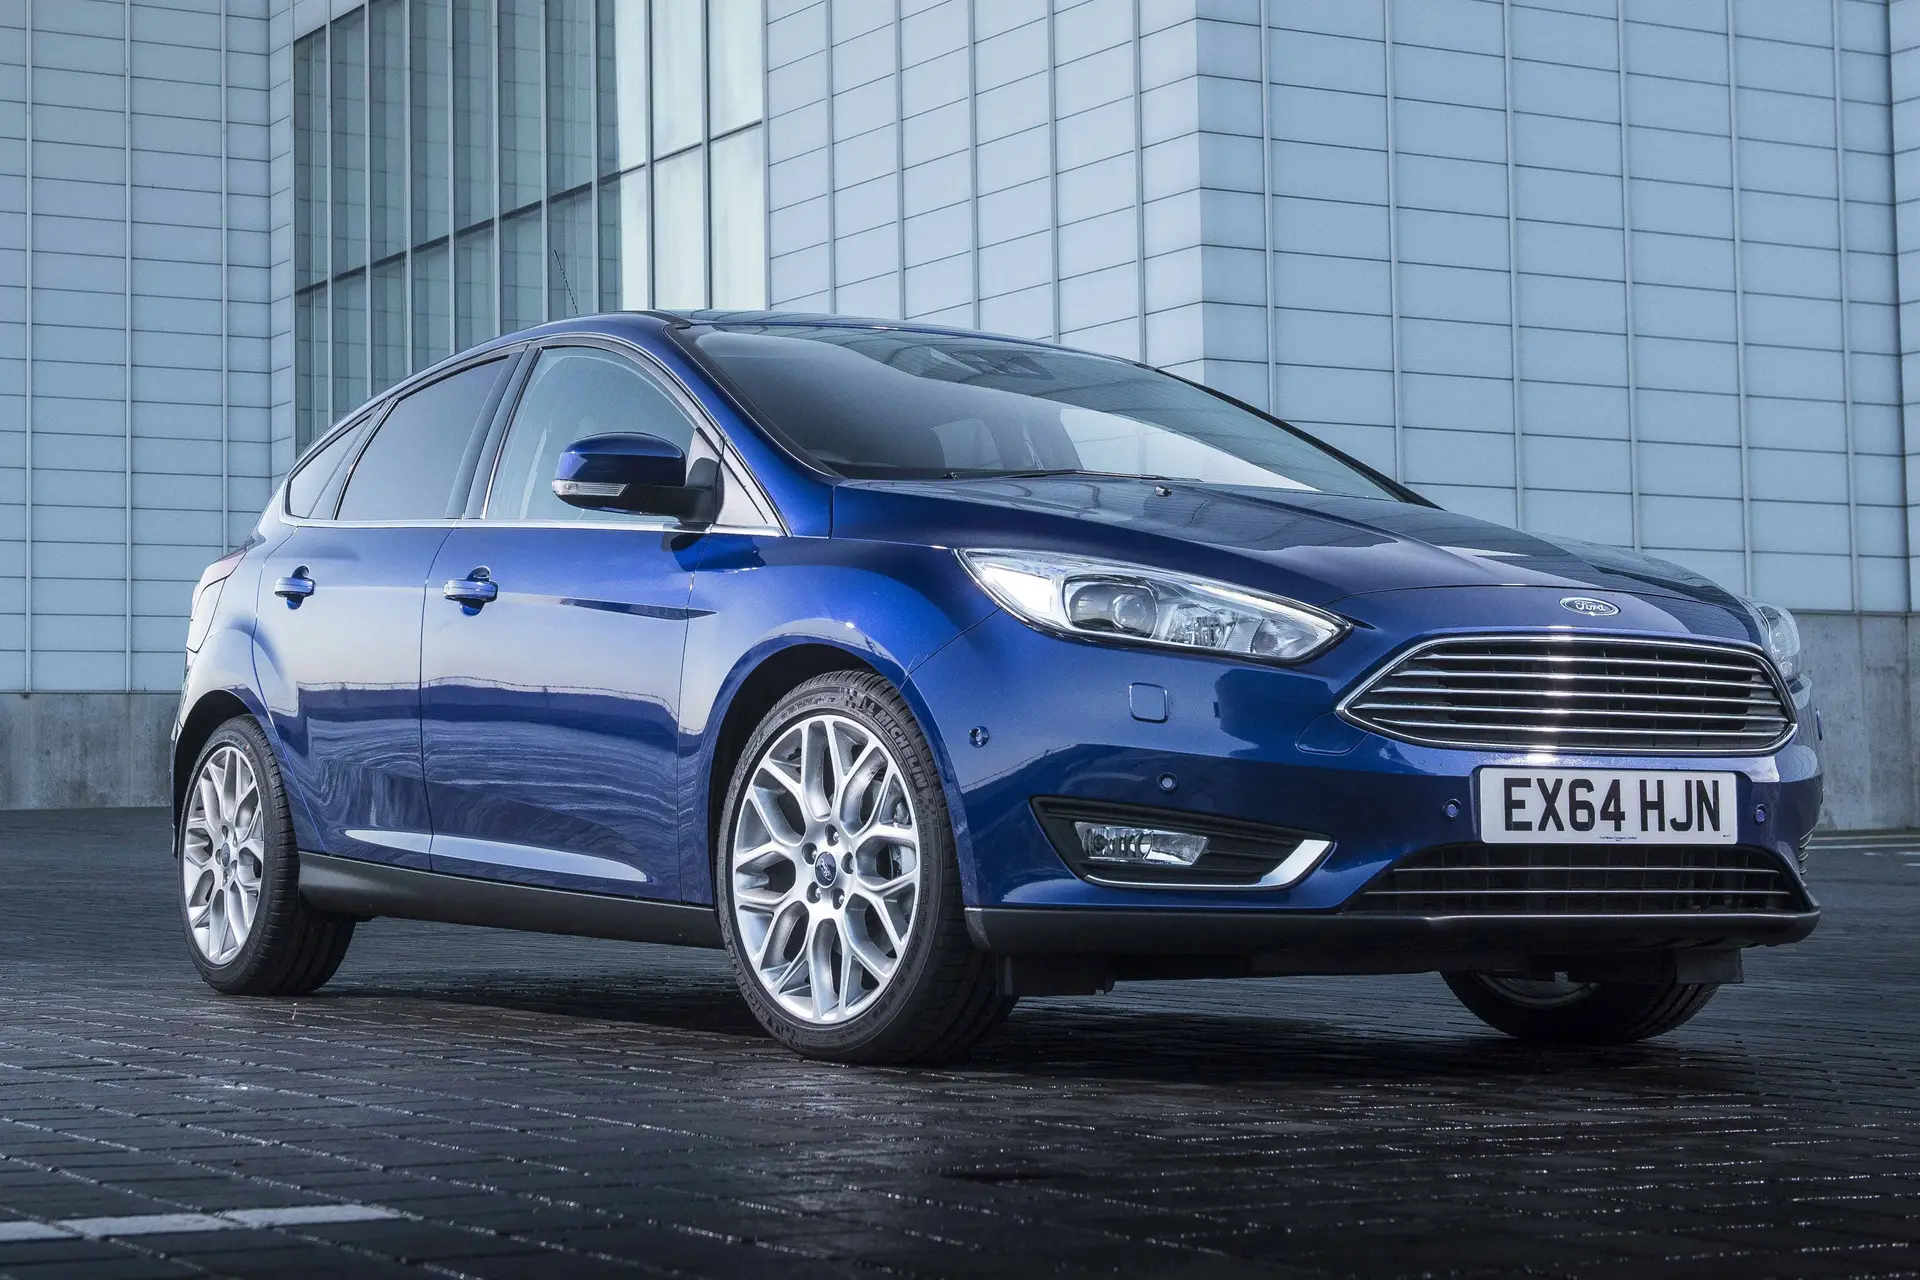 Ford Focus (2014-2018) Review: exterior front three quarter photo of the Ford Focus